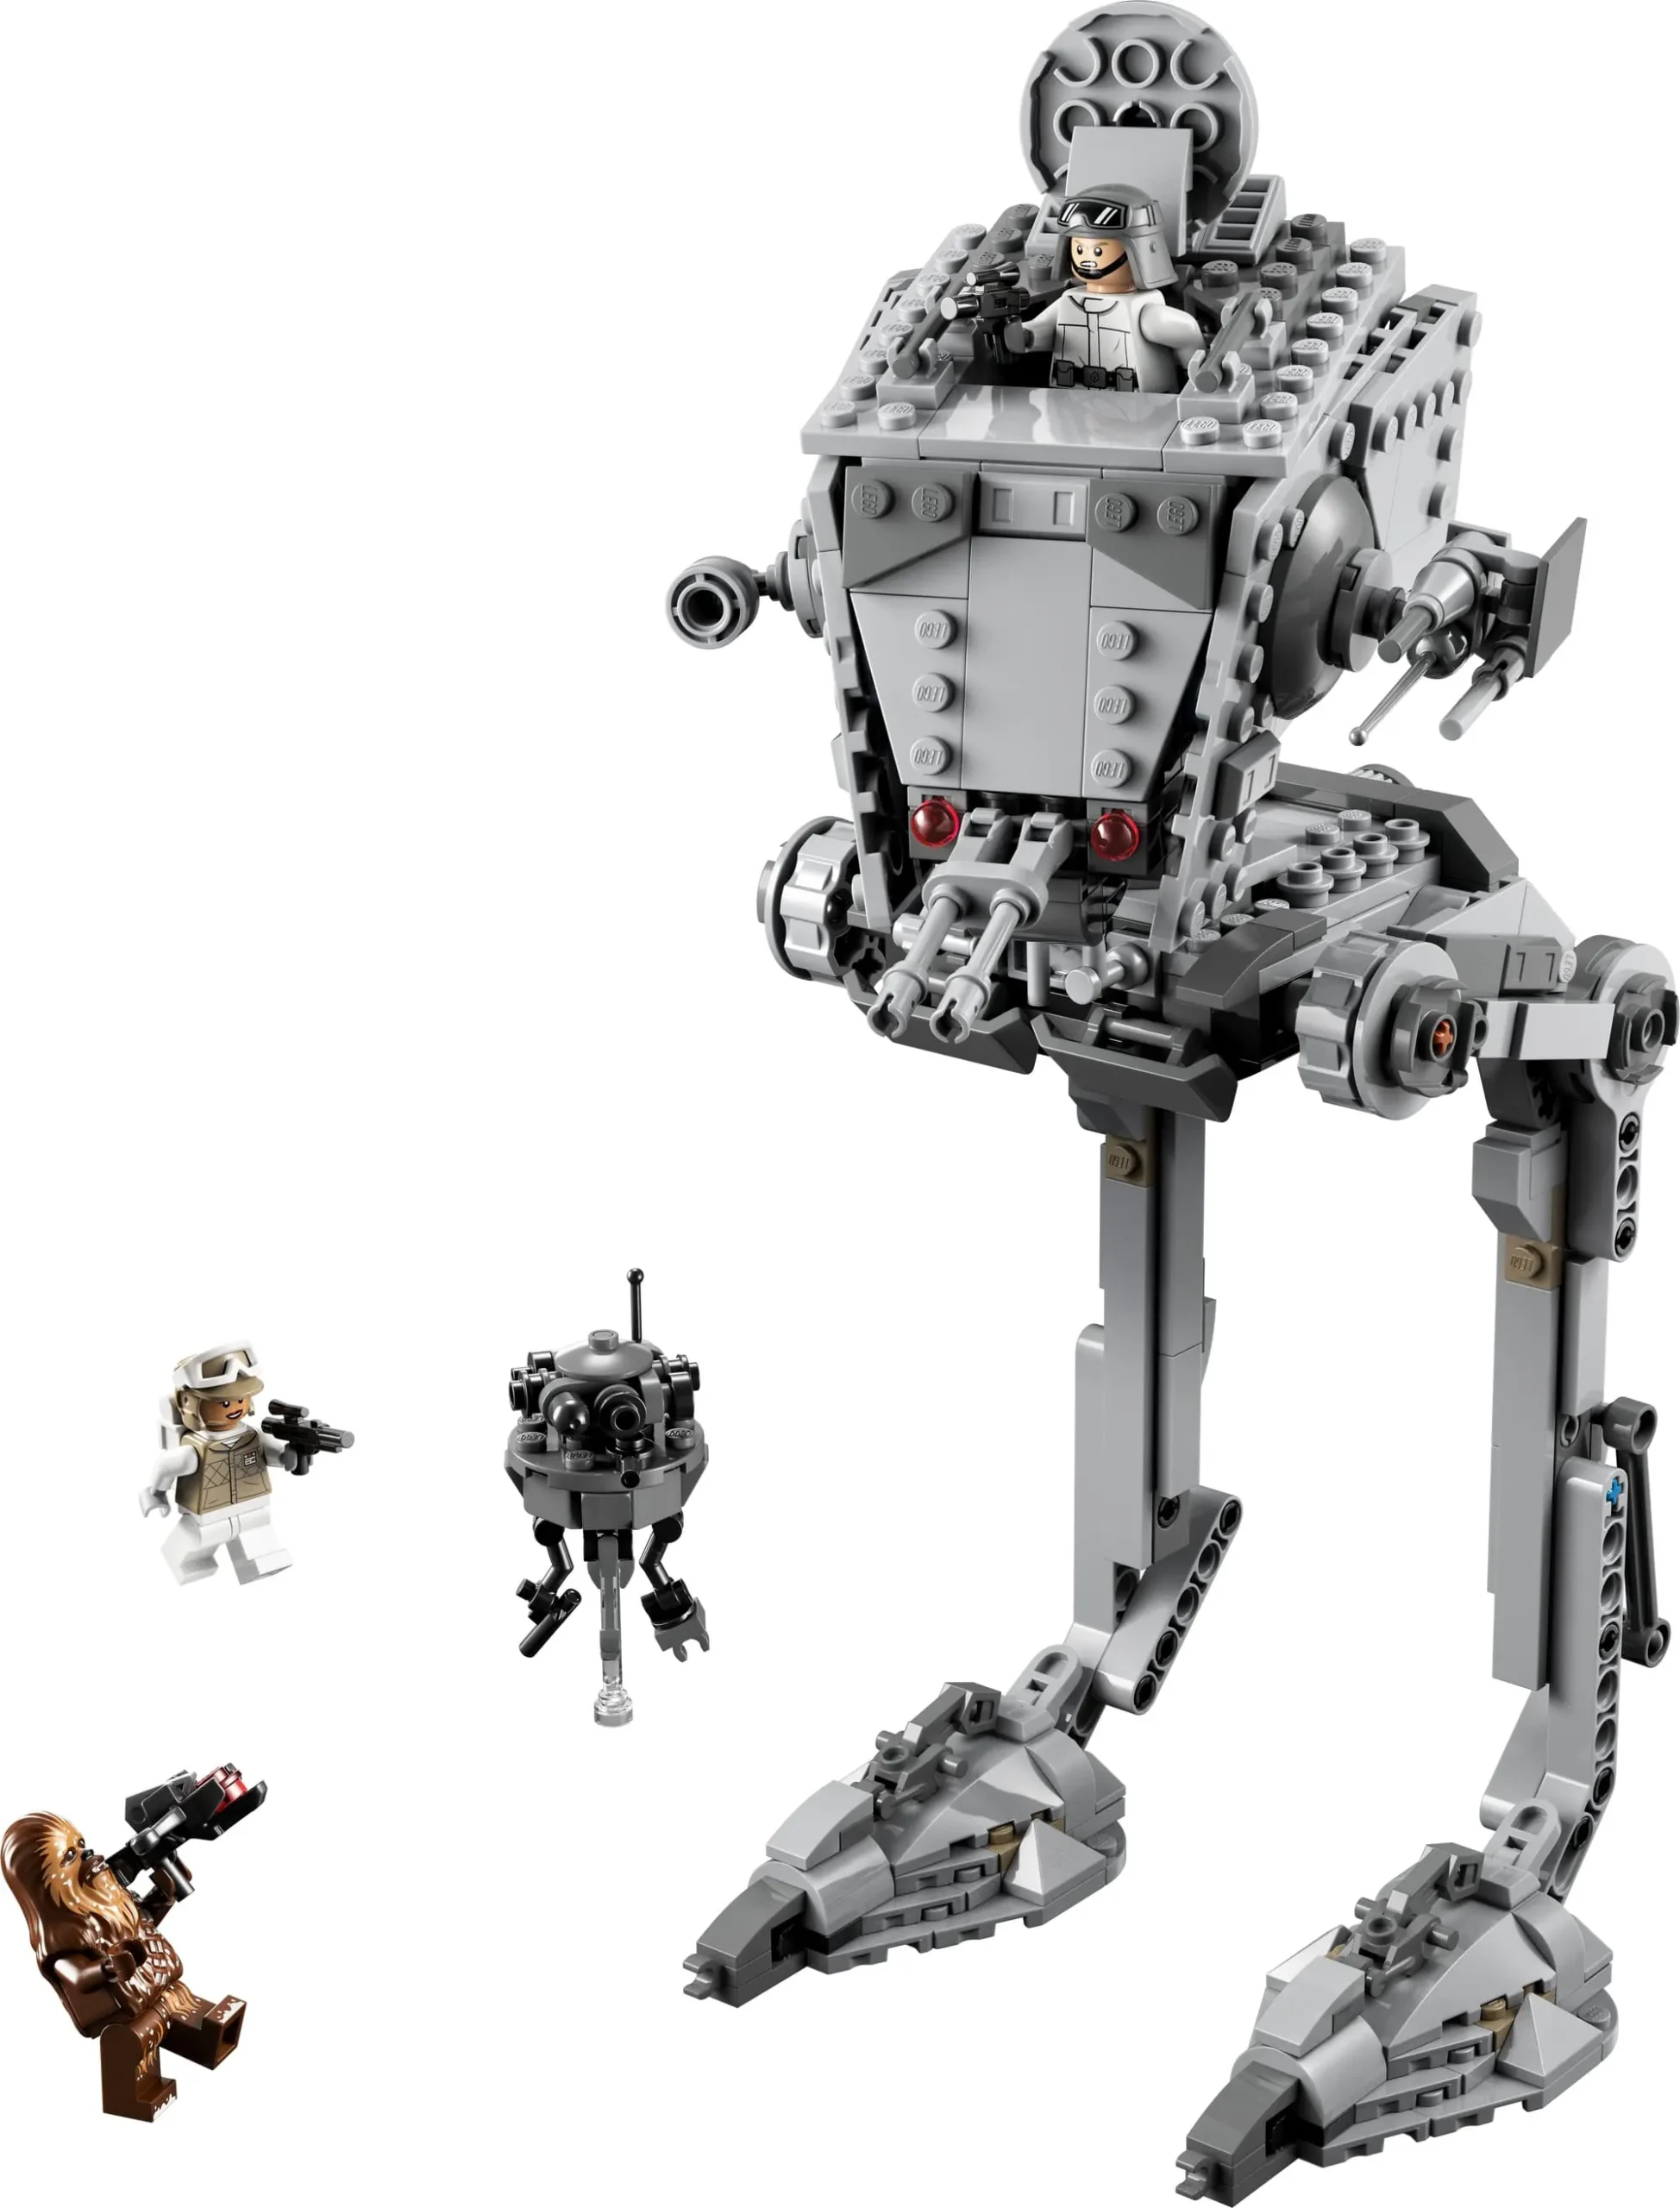 LEGO Star Wars 75321 Razor Crest Microfighter, 75320 Hoth Battle Pack, 75322 Hoth AT-ST New Products for Jan. 1st 2022